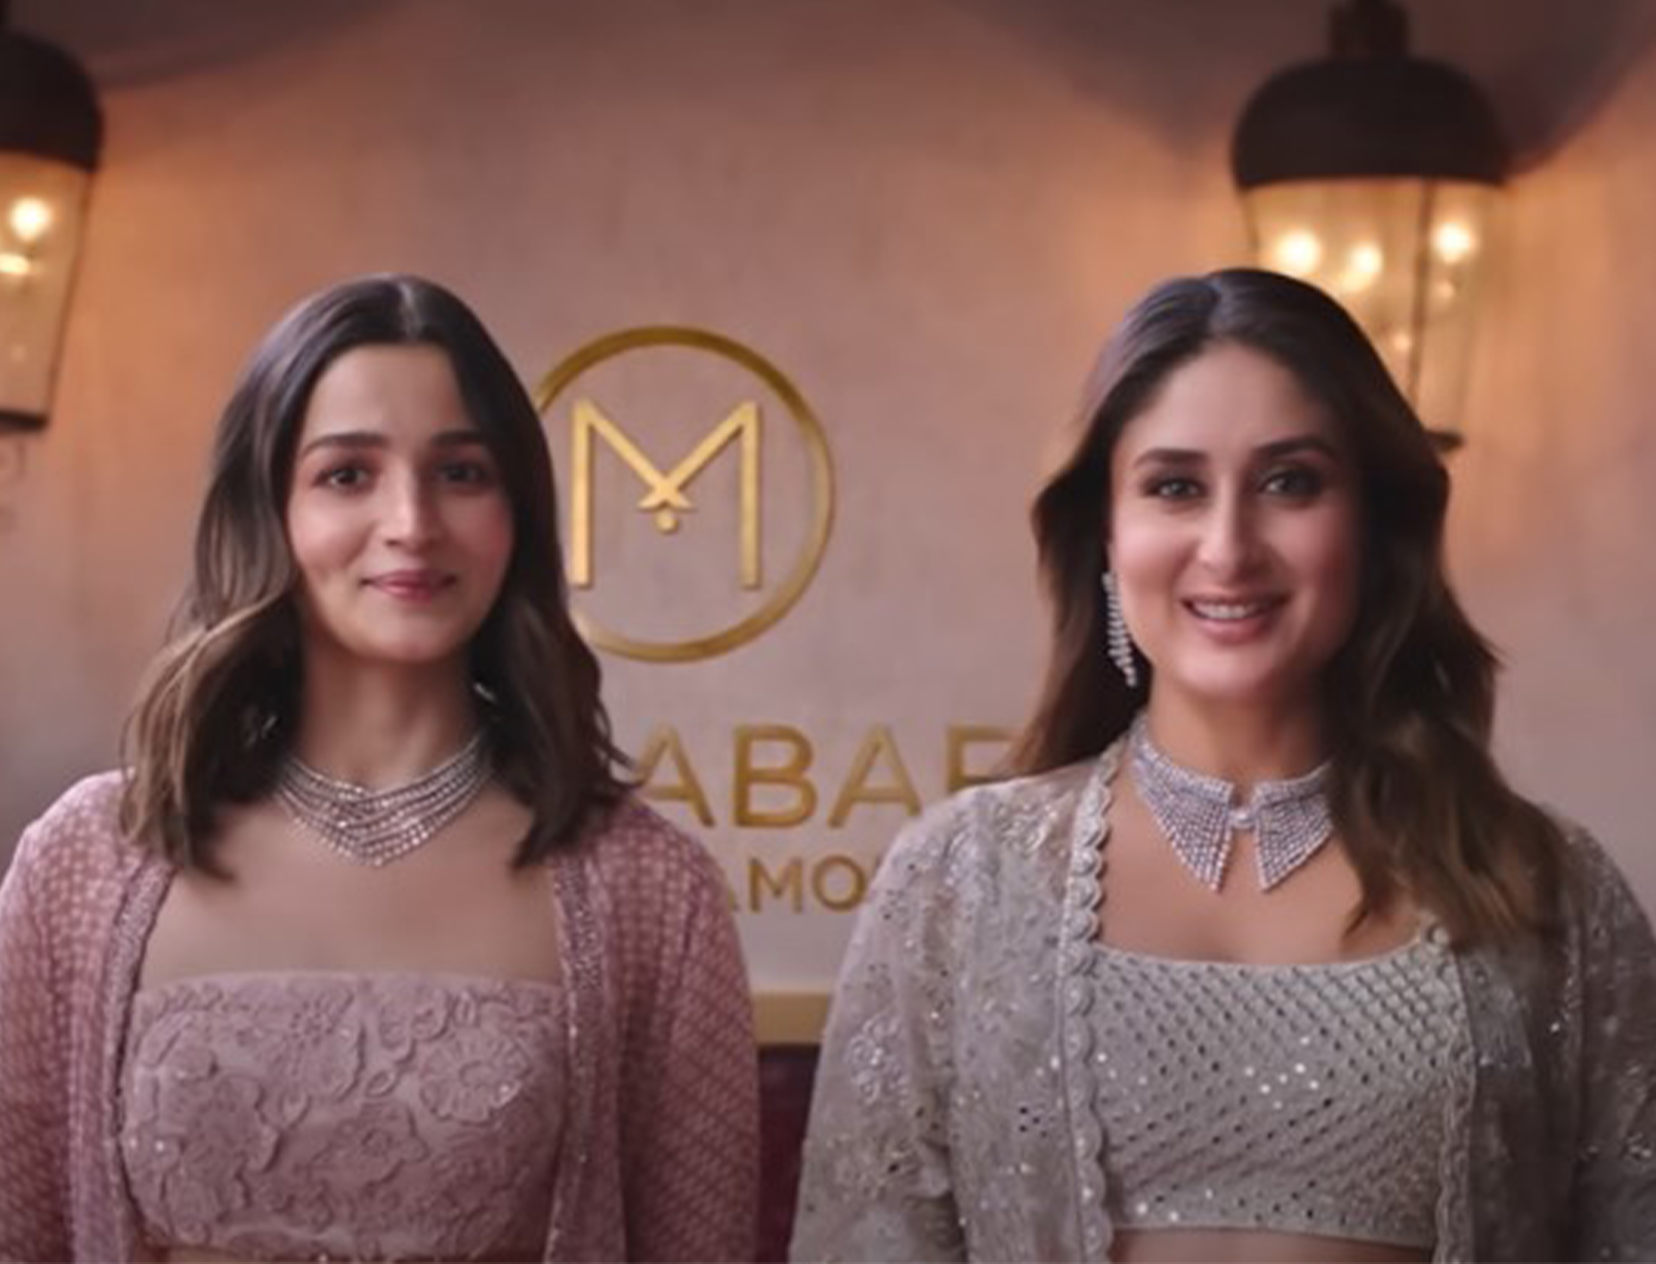 5 Heartwarming Moments From Kareena Kapoor &amp; Alia Bhatt’s New Ad That Touched Our Souls